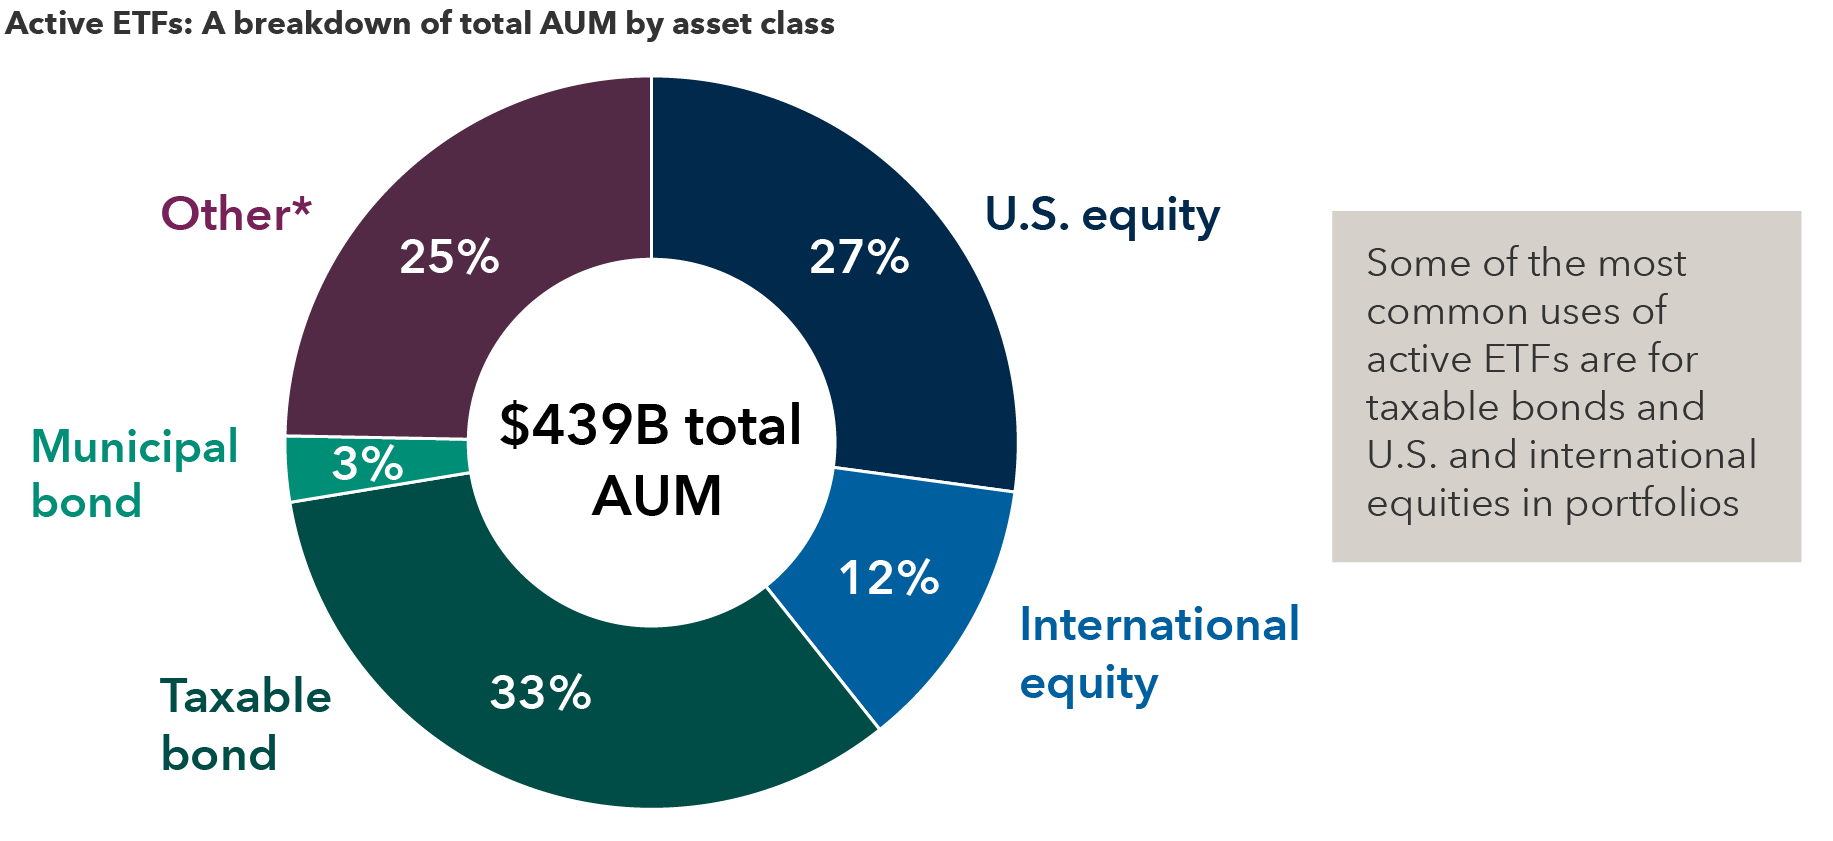 A pie chart showing the breakdown of the $439 billion total active ETF AUM by asset class. U.S. equity represents 27%. International equity represents 12%. Taxable bond represents 33%. Municipal bond represents 3%. The “Other” category represents 25% and includes commodities, alternatives, allocation, nontraditional equity, sector equity and miscellaneous. A text callout to the right of the chart states that some of the most common uses of active ETFs are for taxable bonds and U.S. and international equities in portfolios.